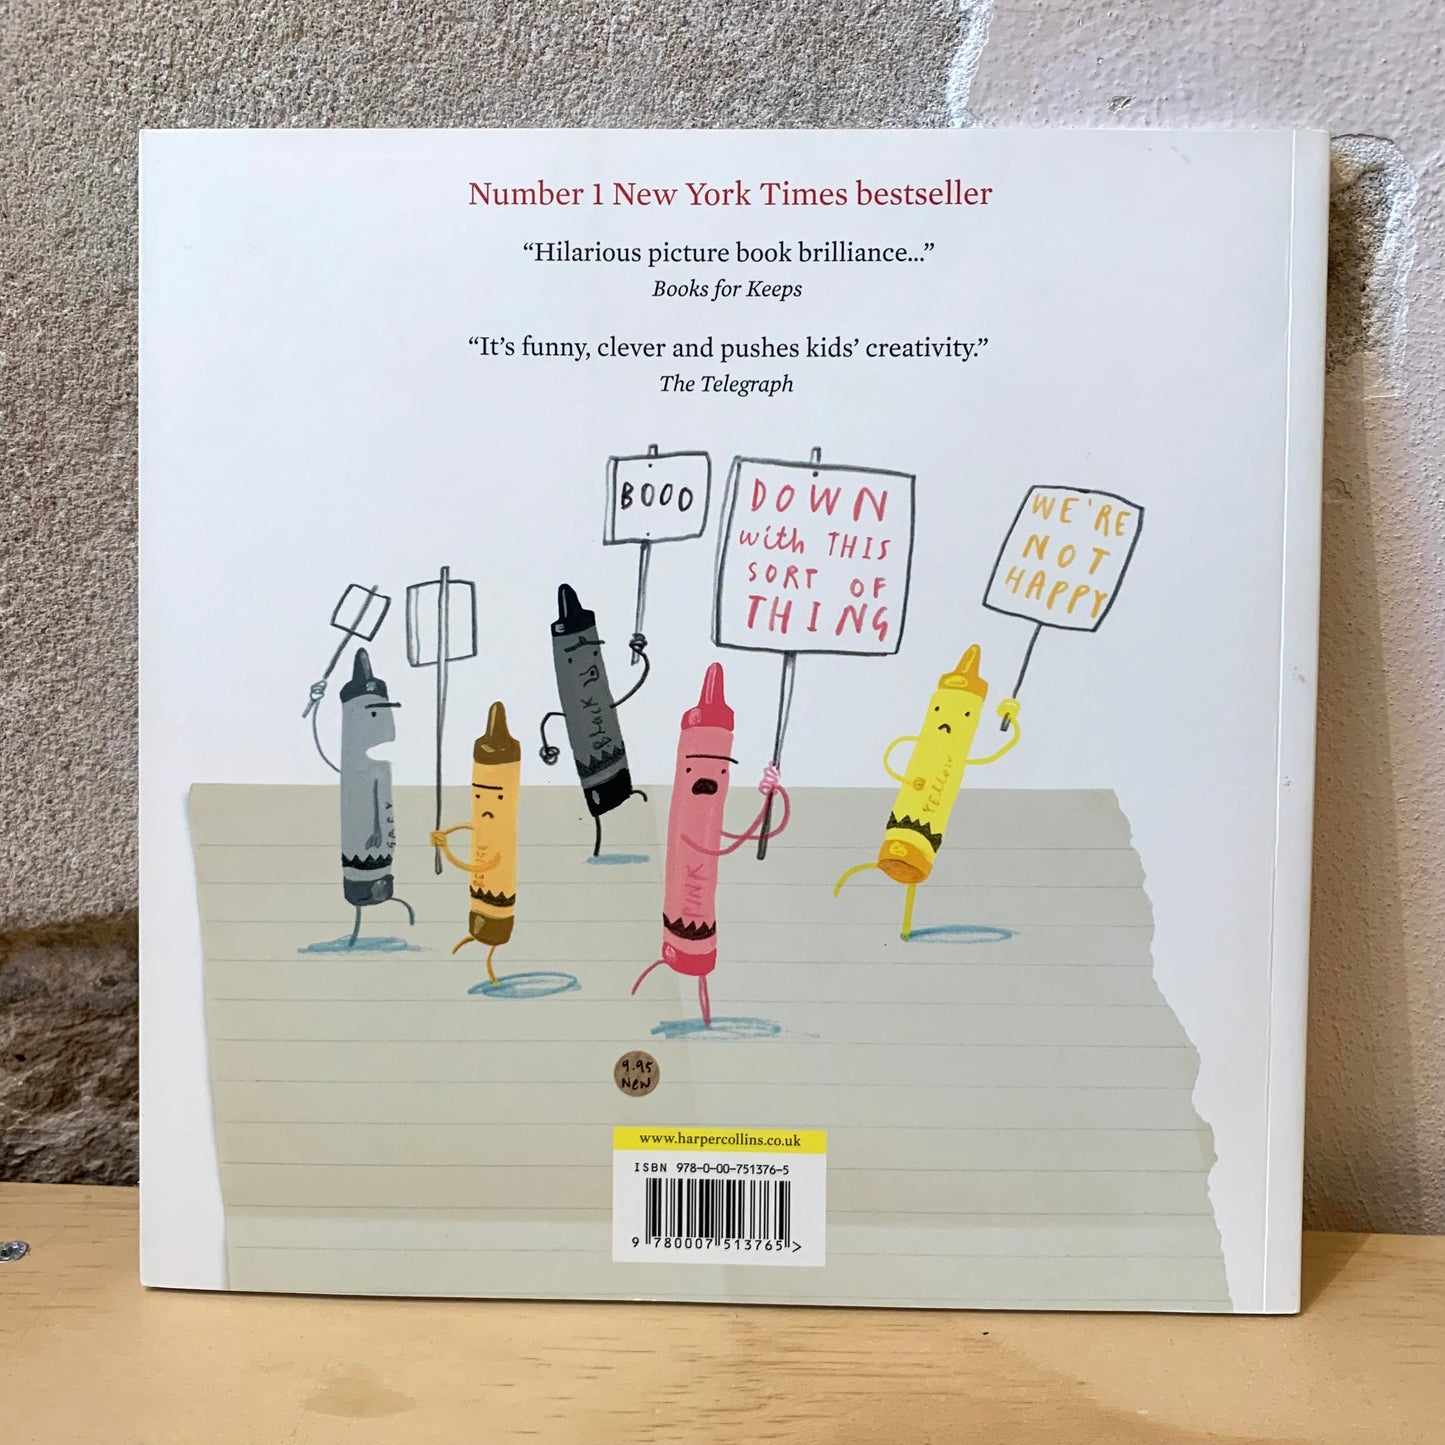 The Day the Crayons Quit – Oliver Jeffers